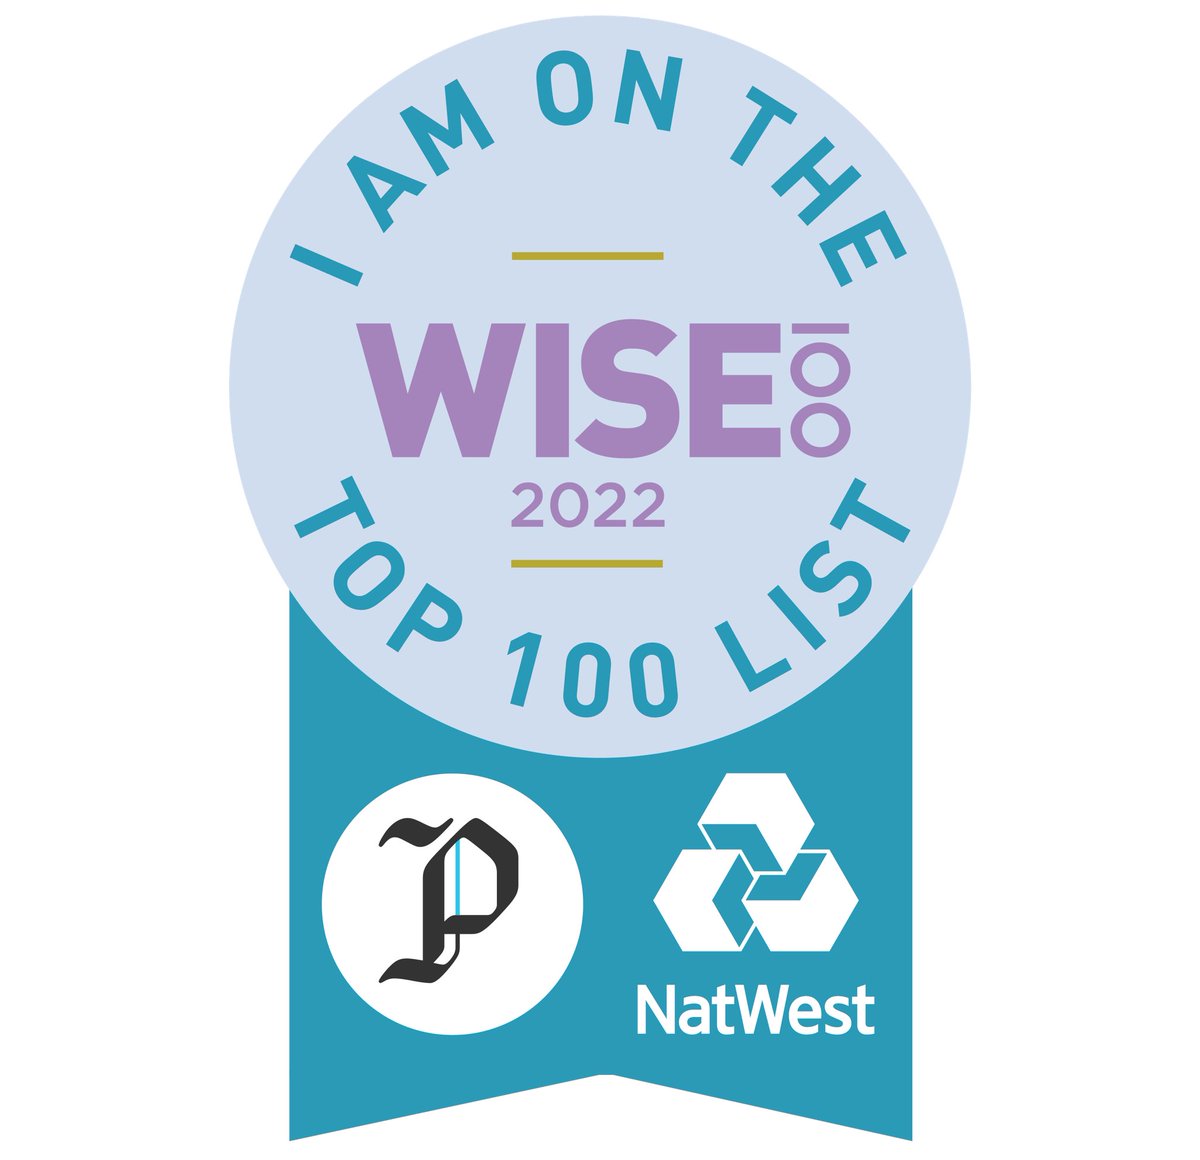 Delighted to have been awarded the @NatWestGroup #WISE100 Accolade for the third year. We need more women leading enterprises of all kinds- full stop! @PioneersPost @SocComCap